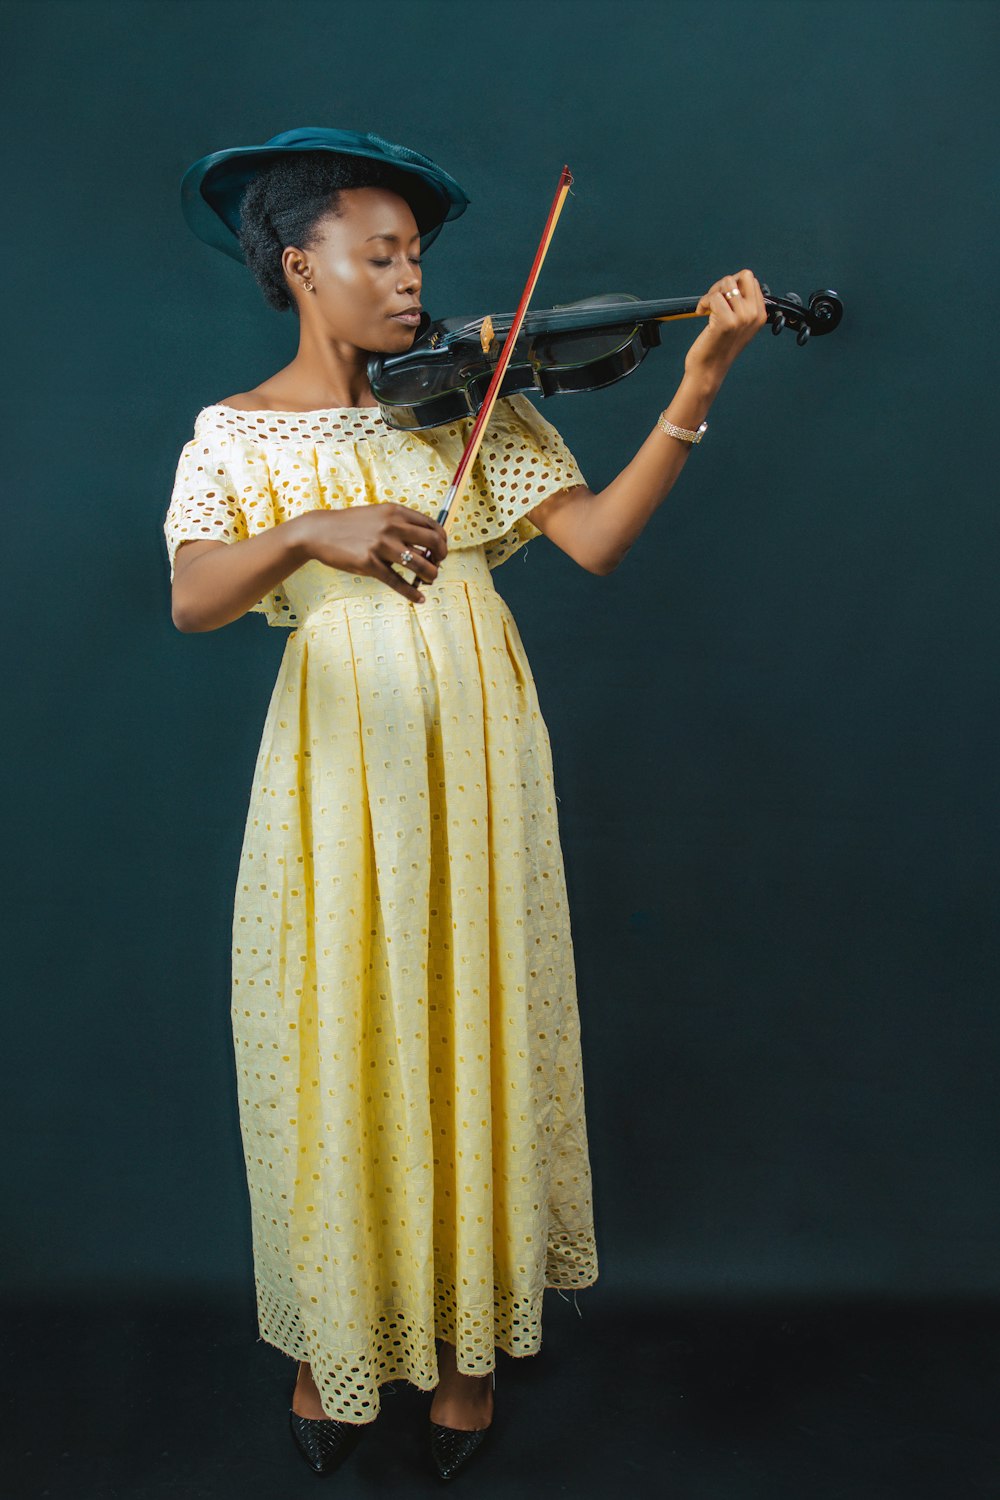 a person in a yellow dress playing a violin